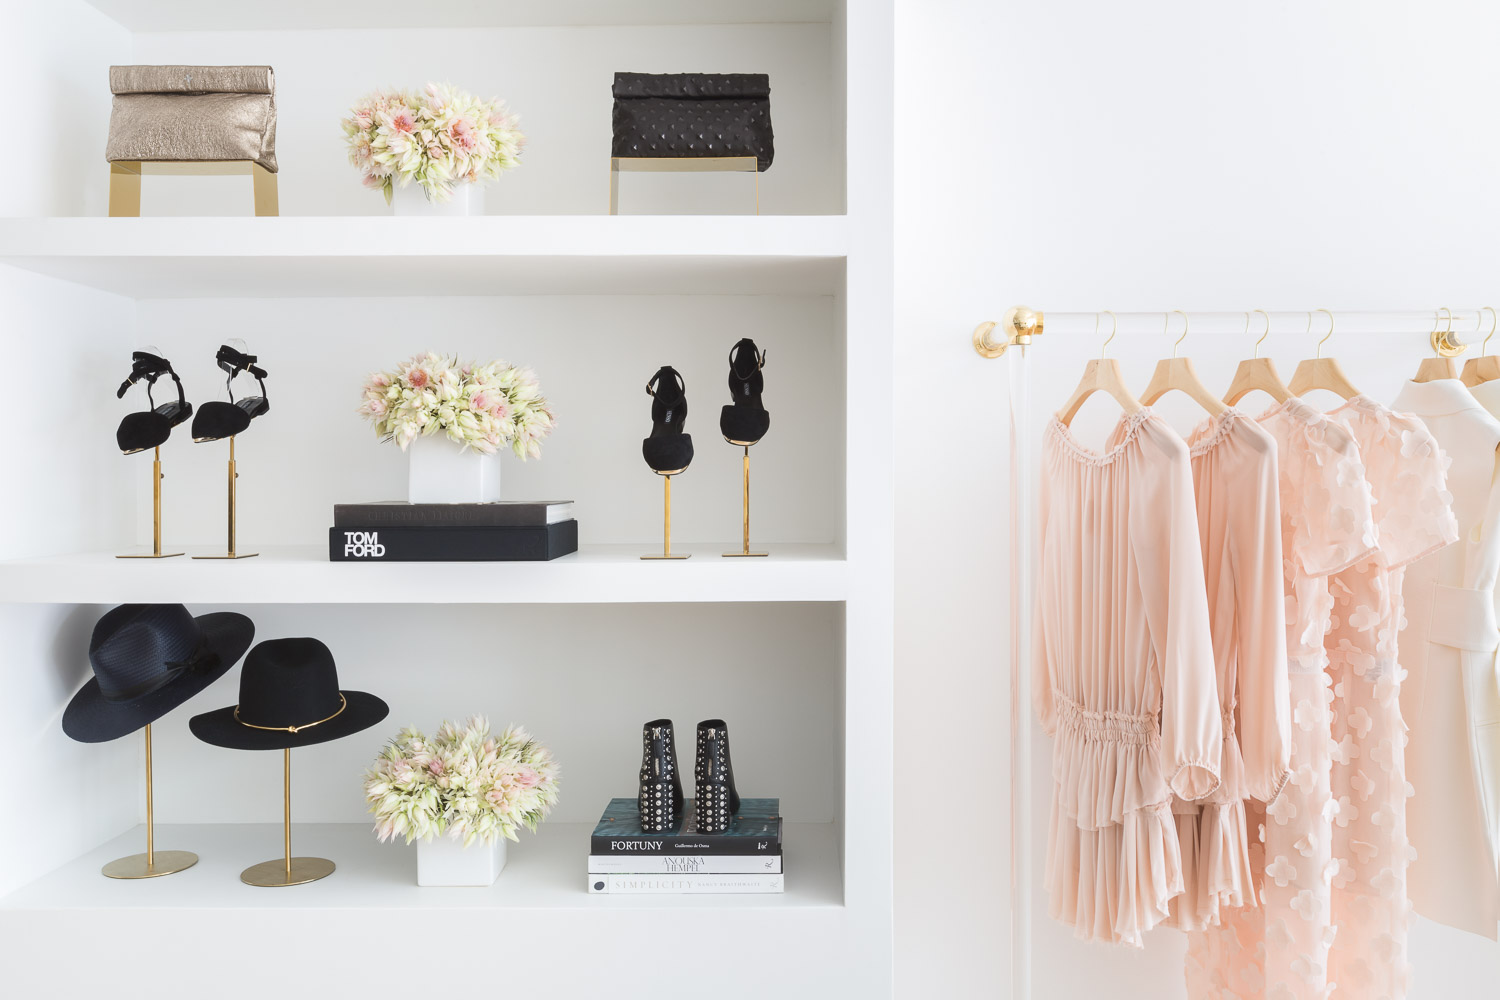 Take a peak at the simple sophistication and laid back luxury of Taylor Anne Design